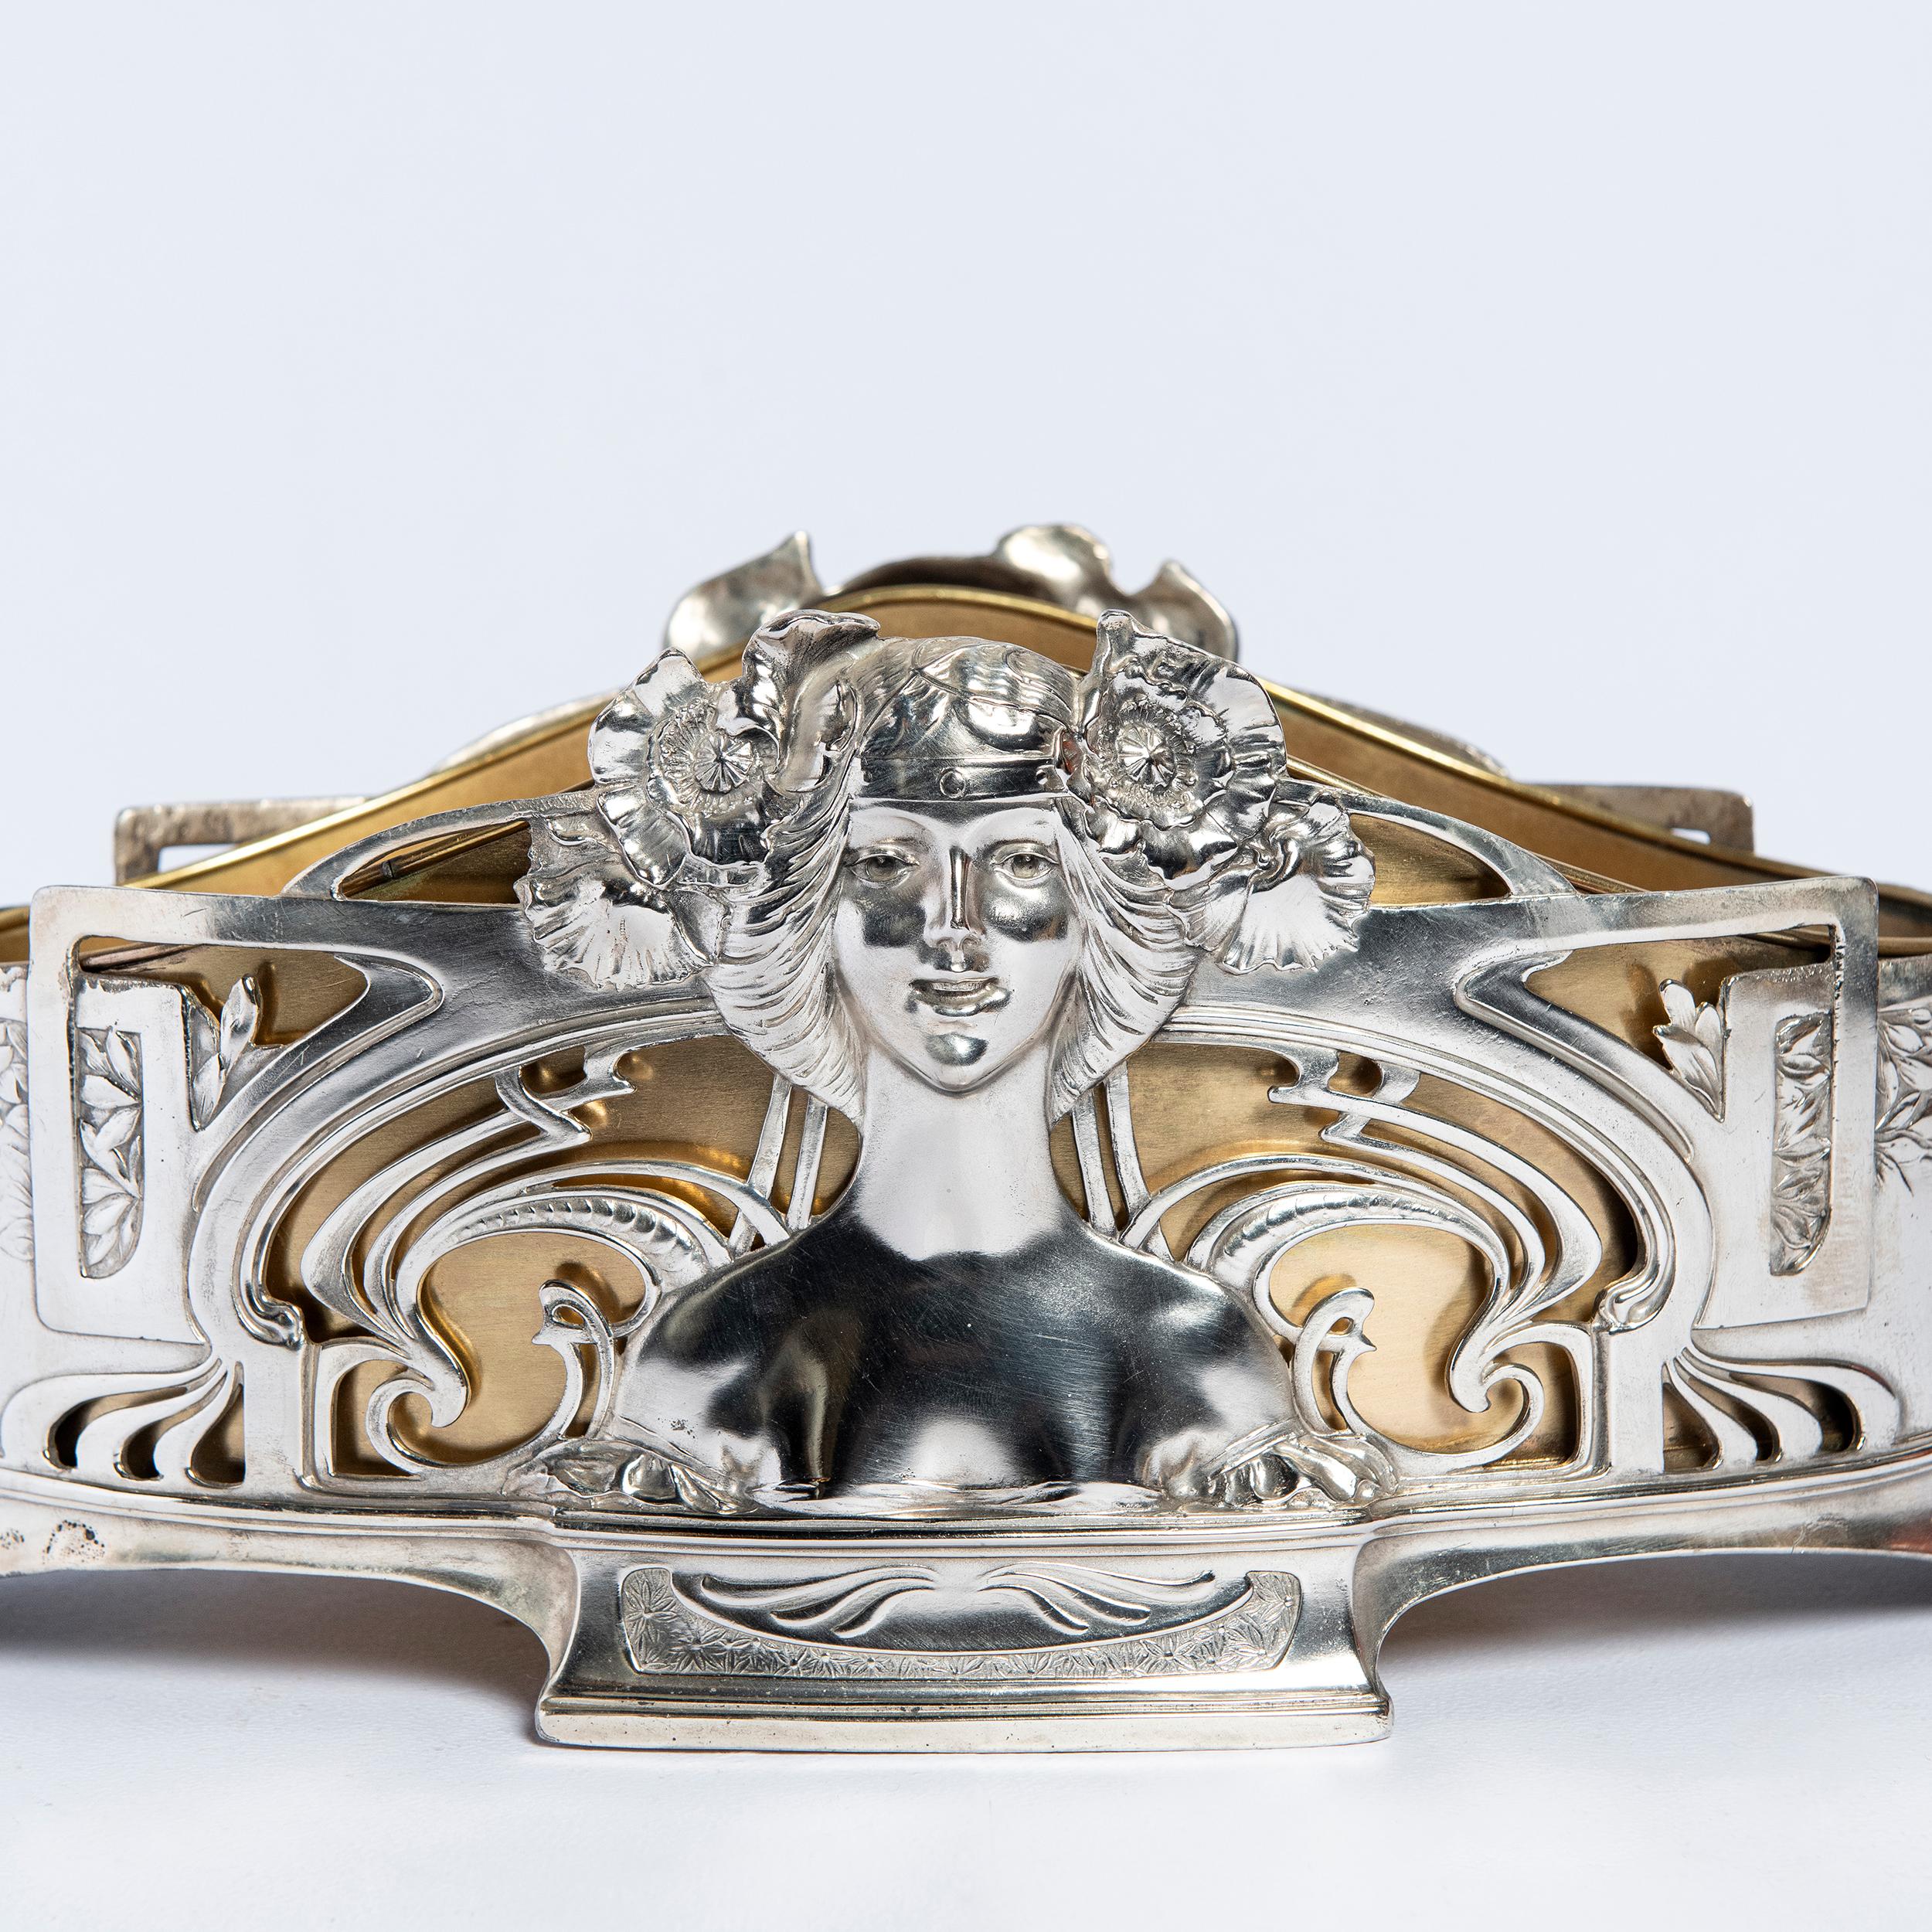 Pair of W.M.F. Silver plate and gilt bronze jardinière, Jugendstil period. Germany, circa 1900.